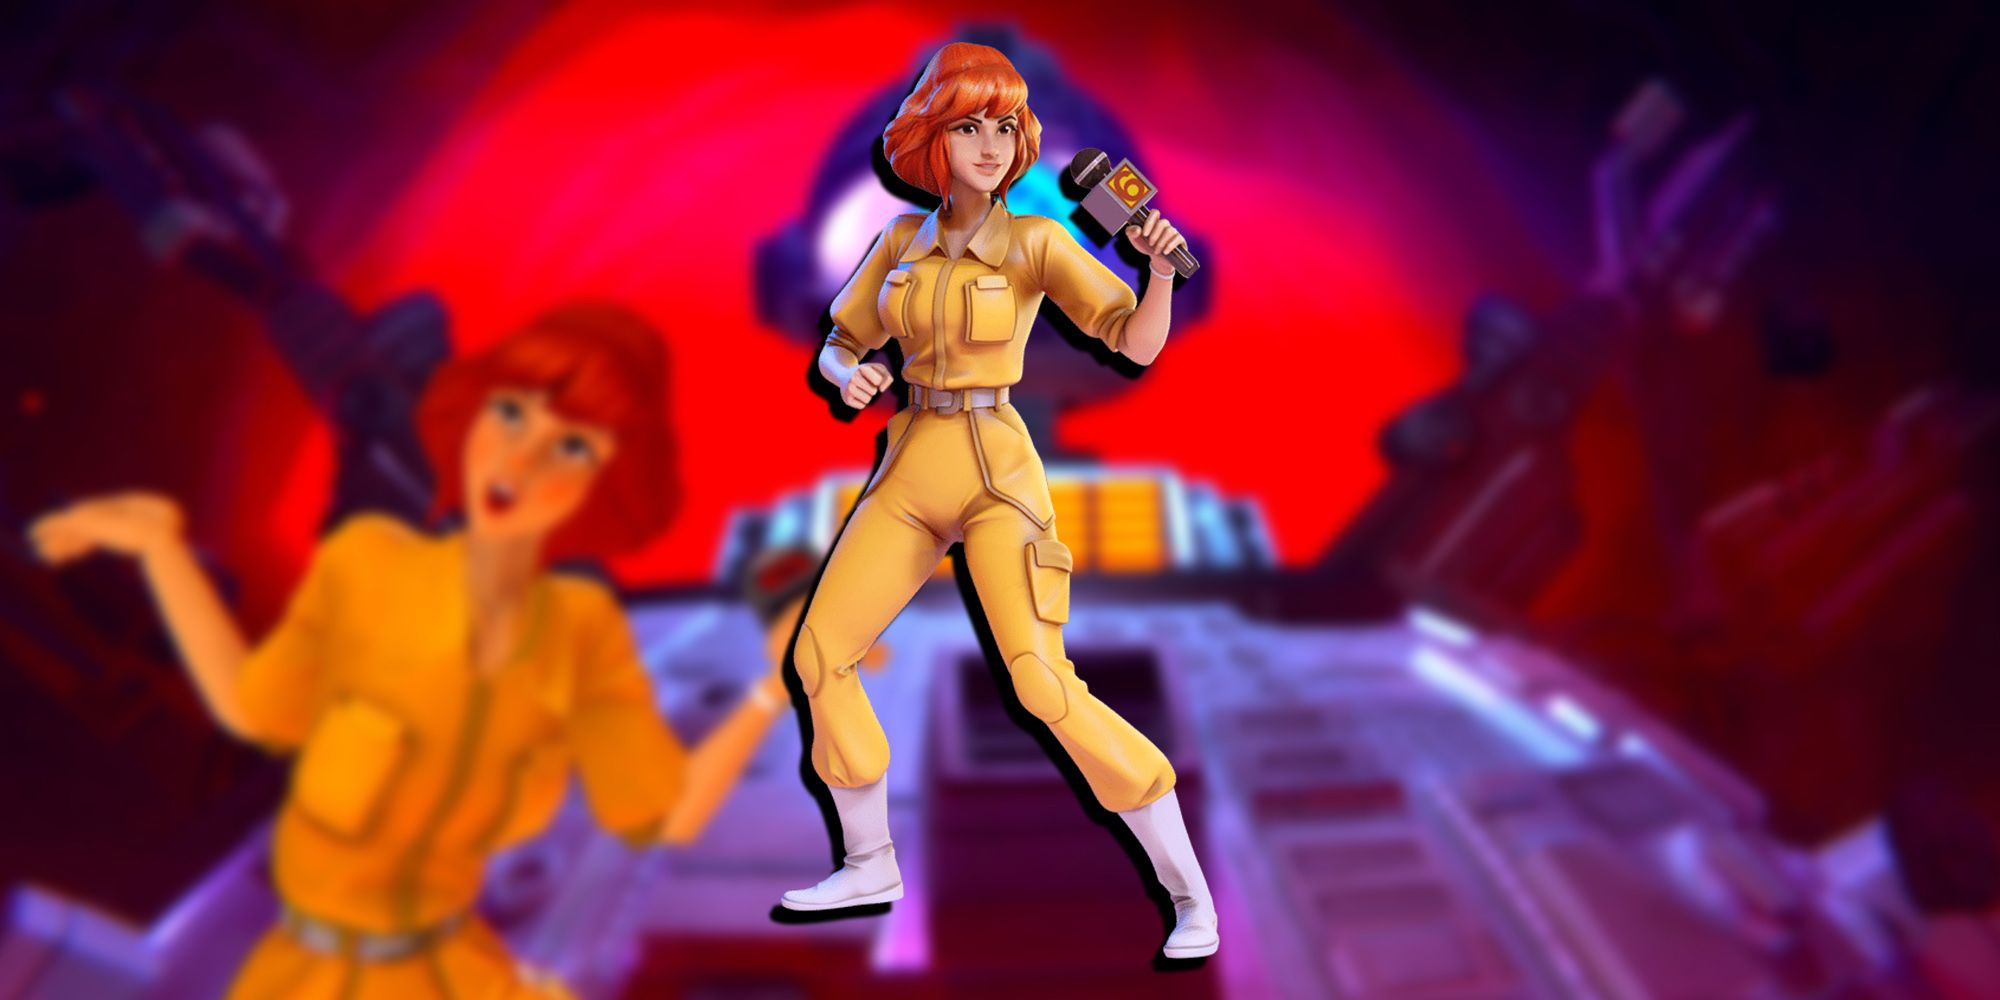 Nickelodeon All-Star Brawl - PNG Render Of April O'Neil Overlaid On Image Of April Shrugging In A Match